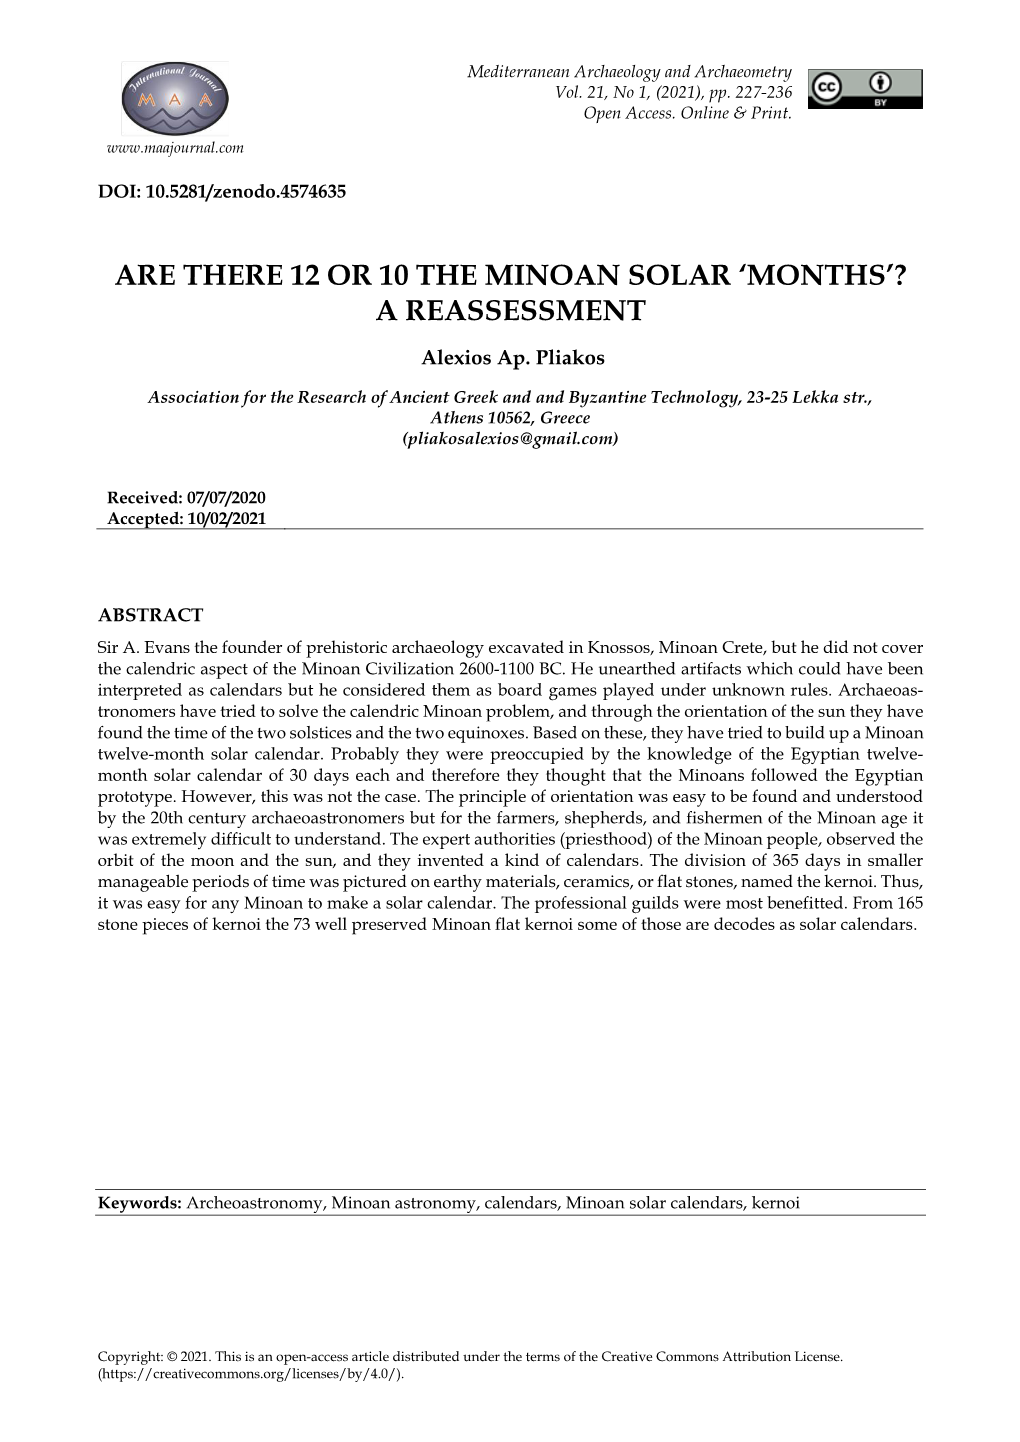 Are There 12 Or 10 the Minoan Solar ‘Months’? a Reassessment